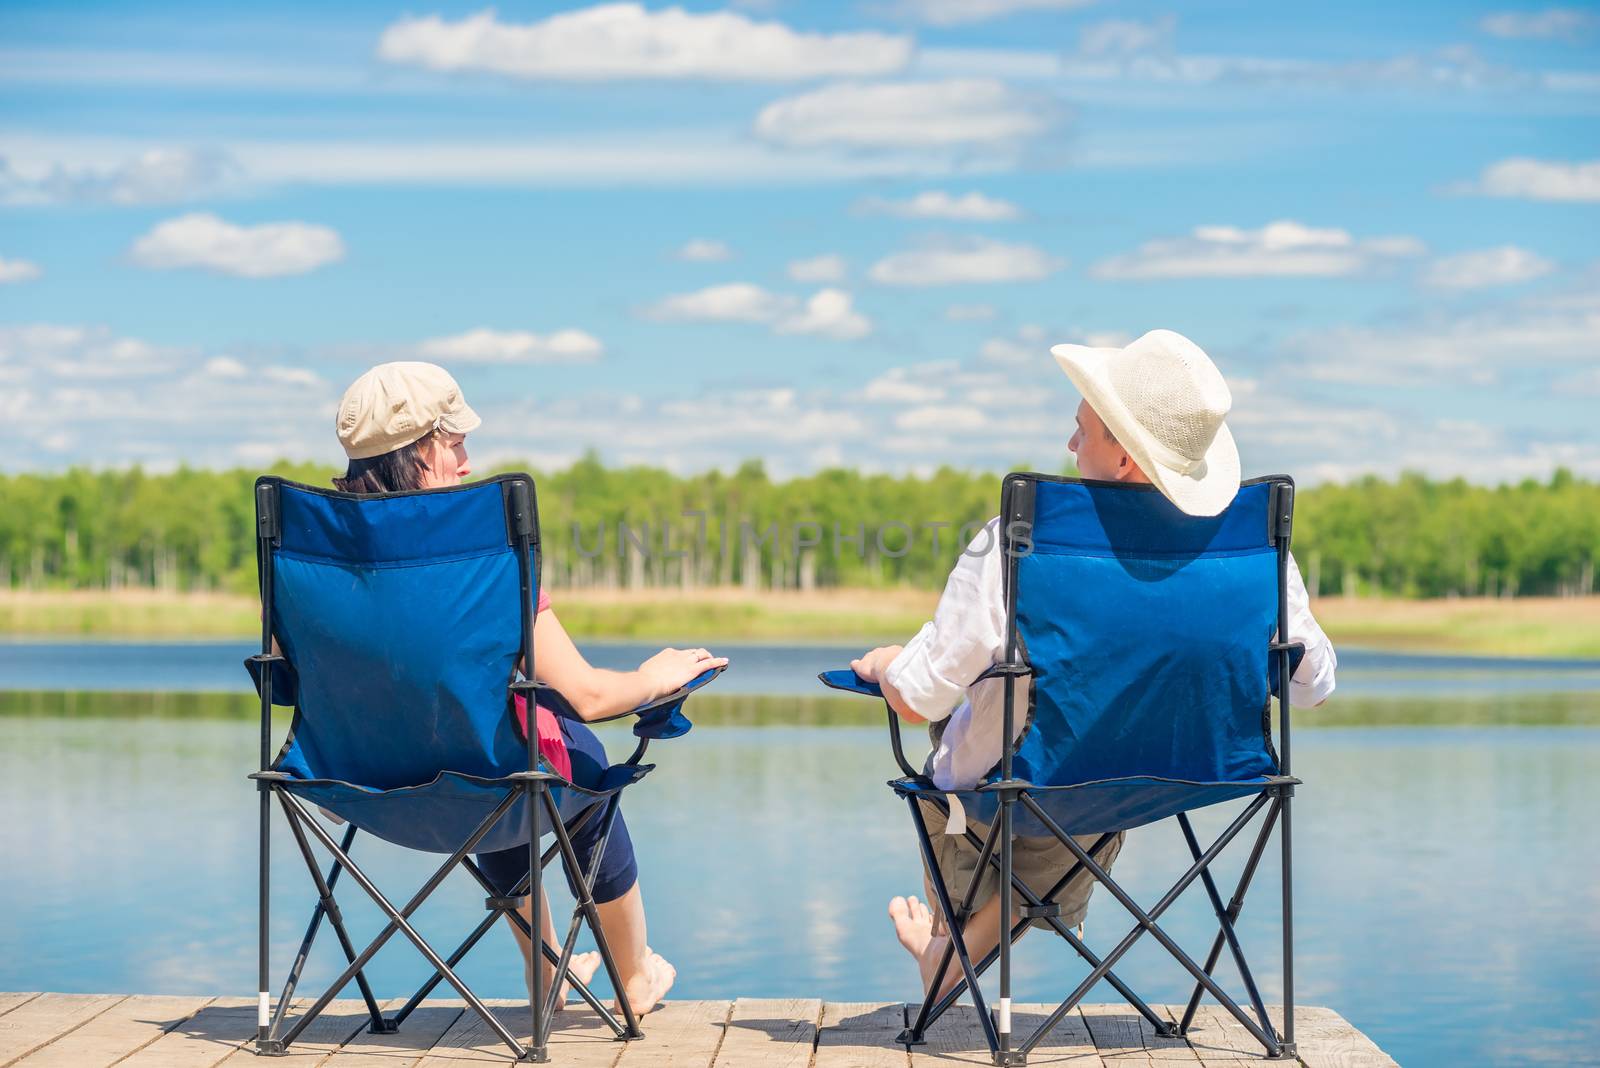 view from the back of a couple on chairs relaxes near a lake on by kosmsos111